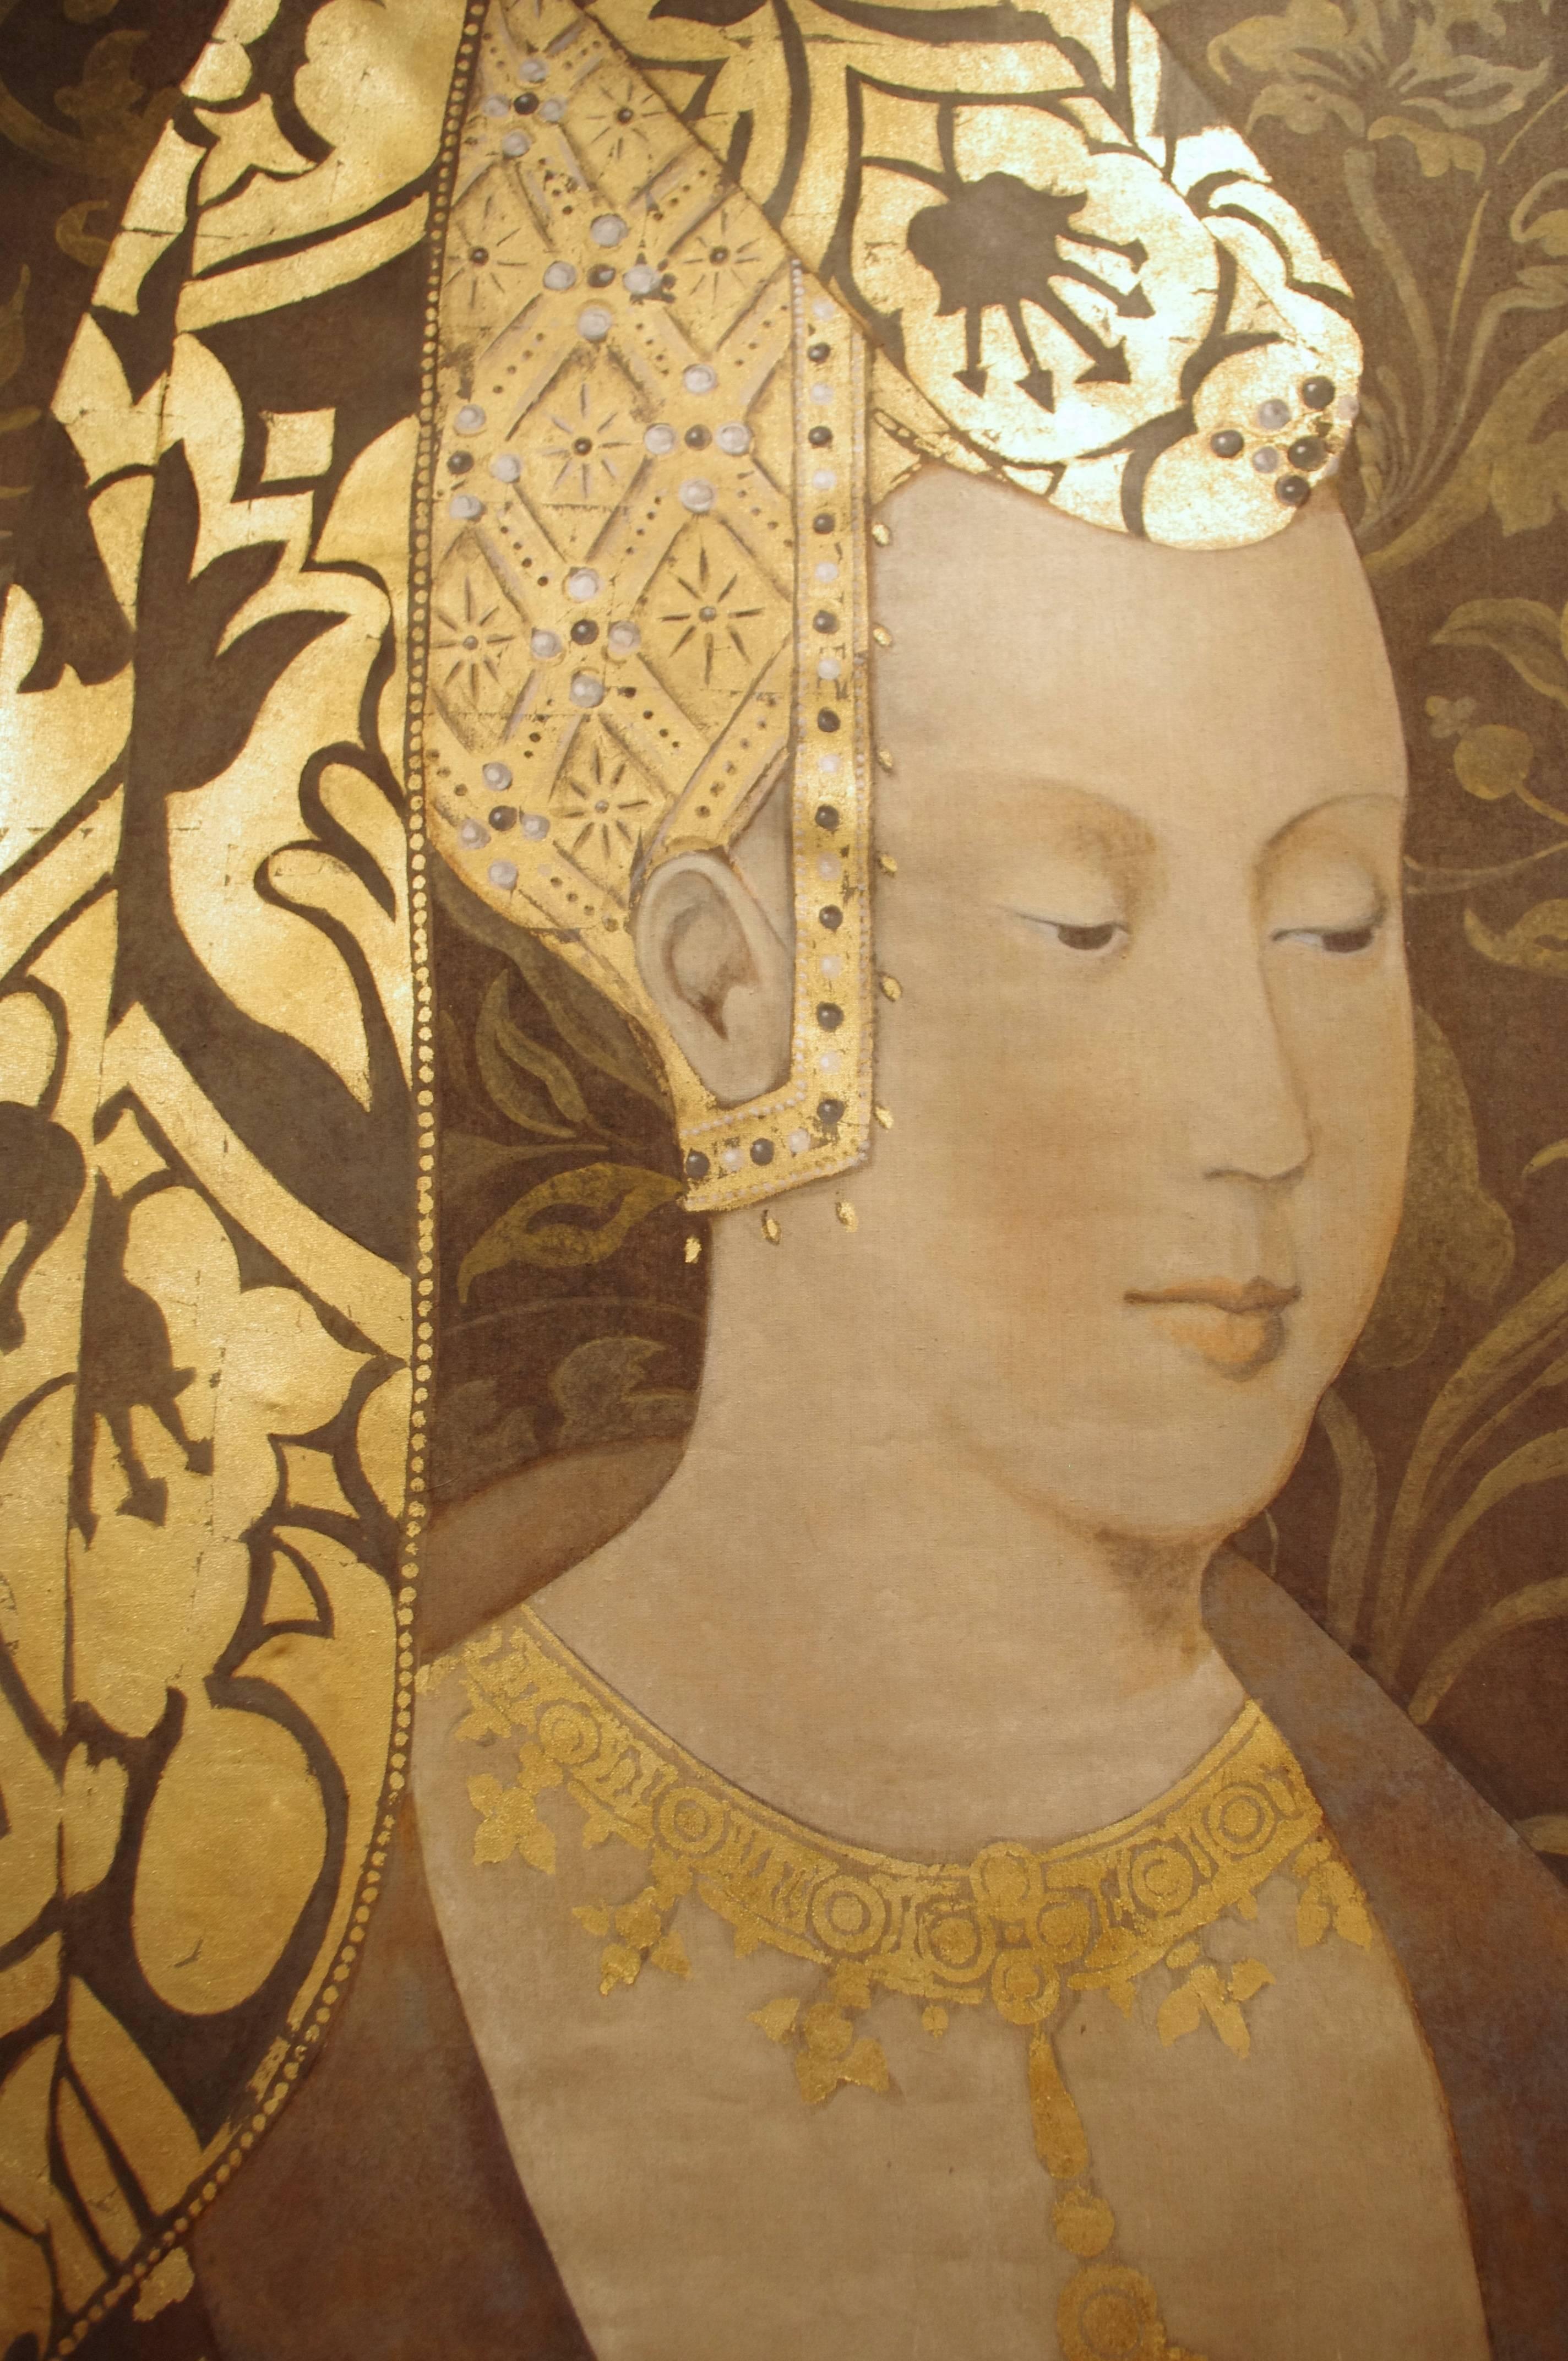 - On linen
- Hand-painted
- French work
- Renaissance style
- Gold leaf highlights.